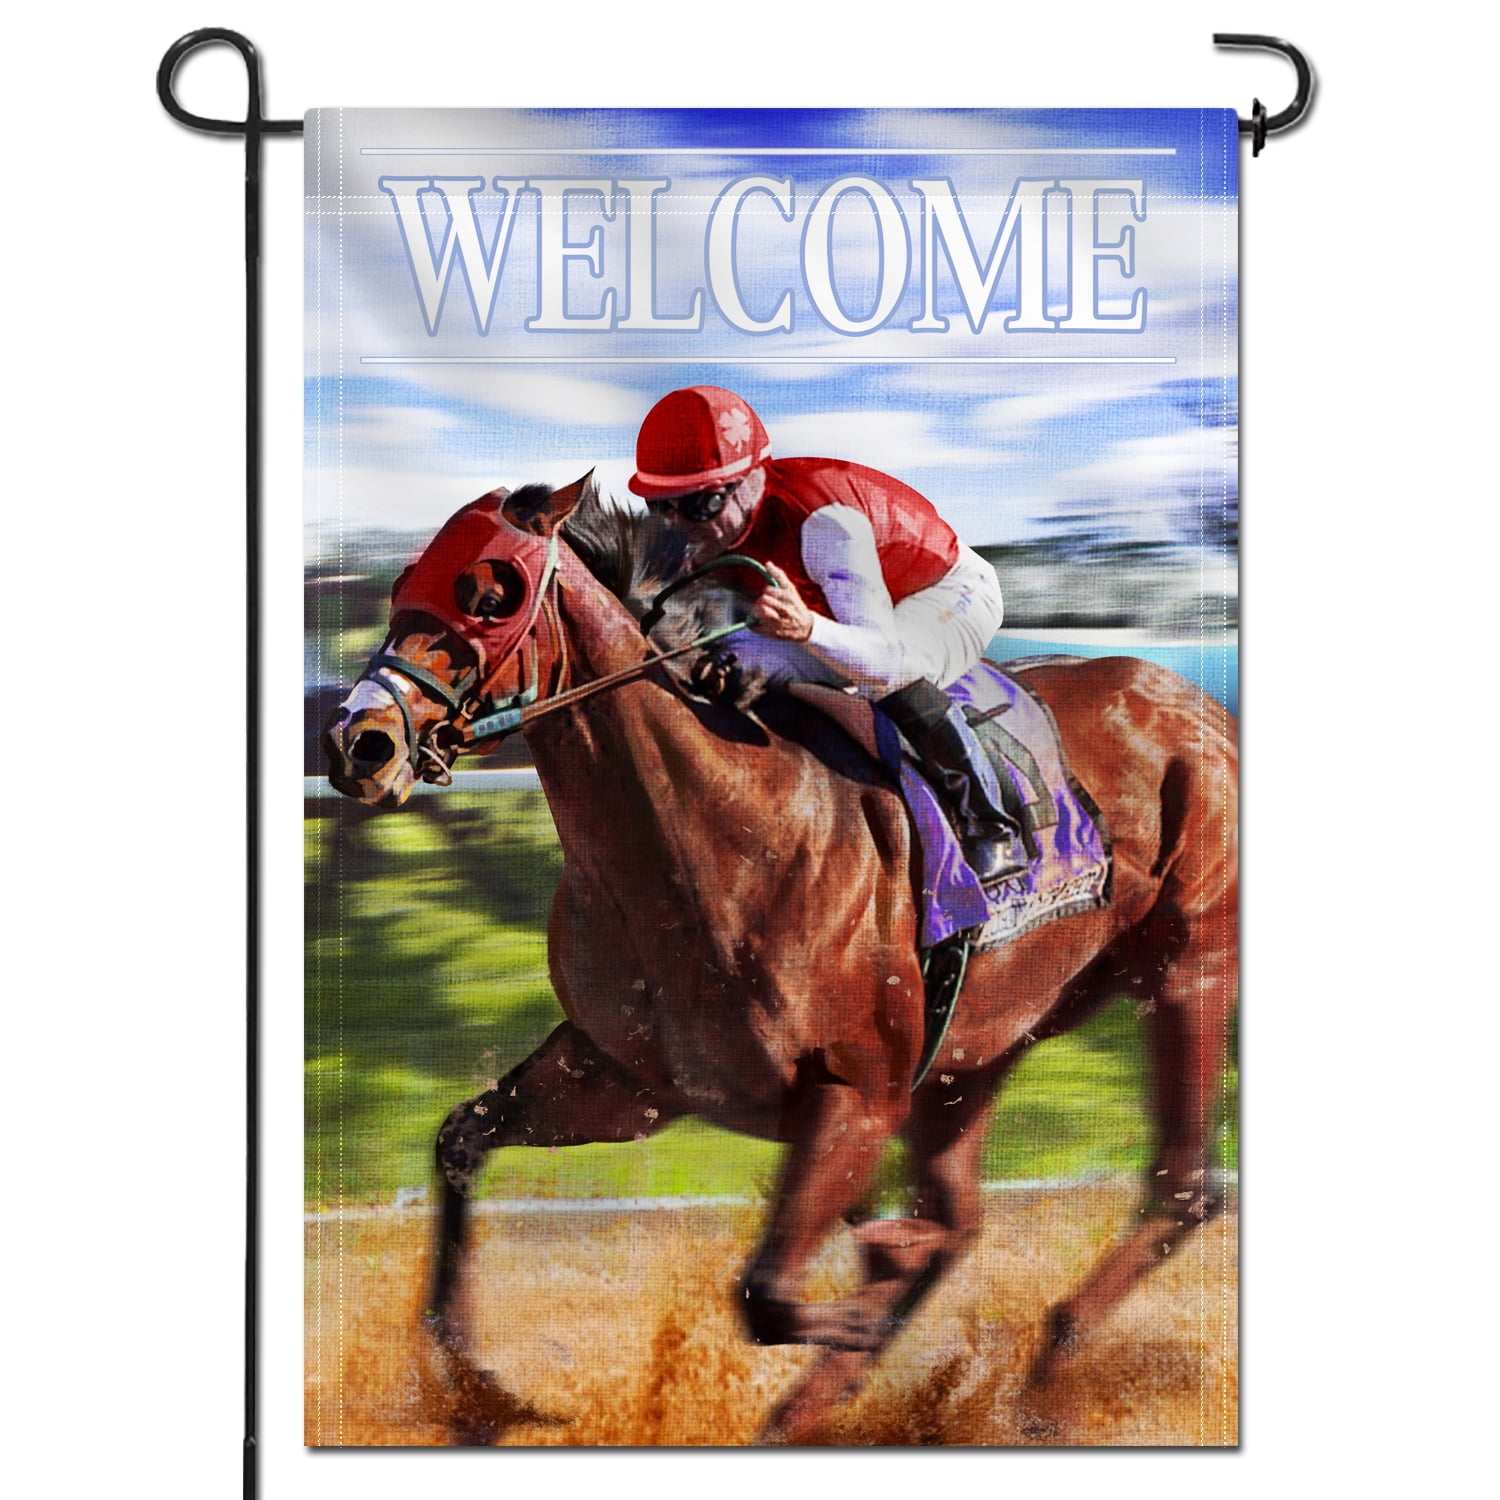 Kentucky Derby Fence Banner Horse Racing Decoration Run for The Roses Horseshoe Derby Holiday Festival Party Yard Garage Garden Decor 